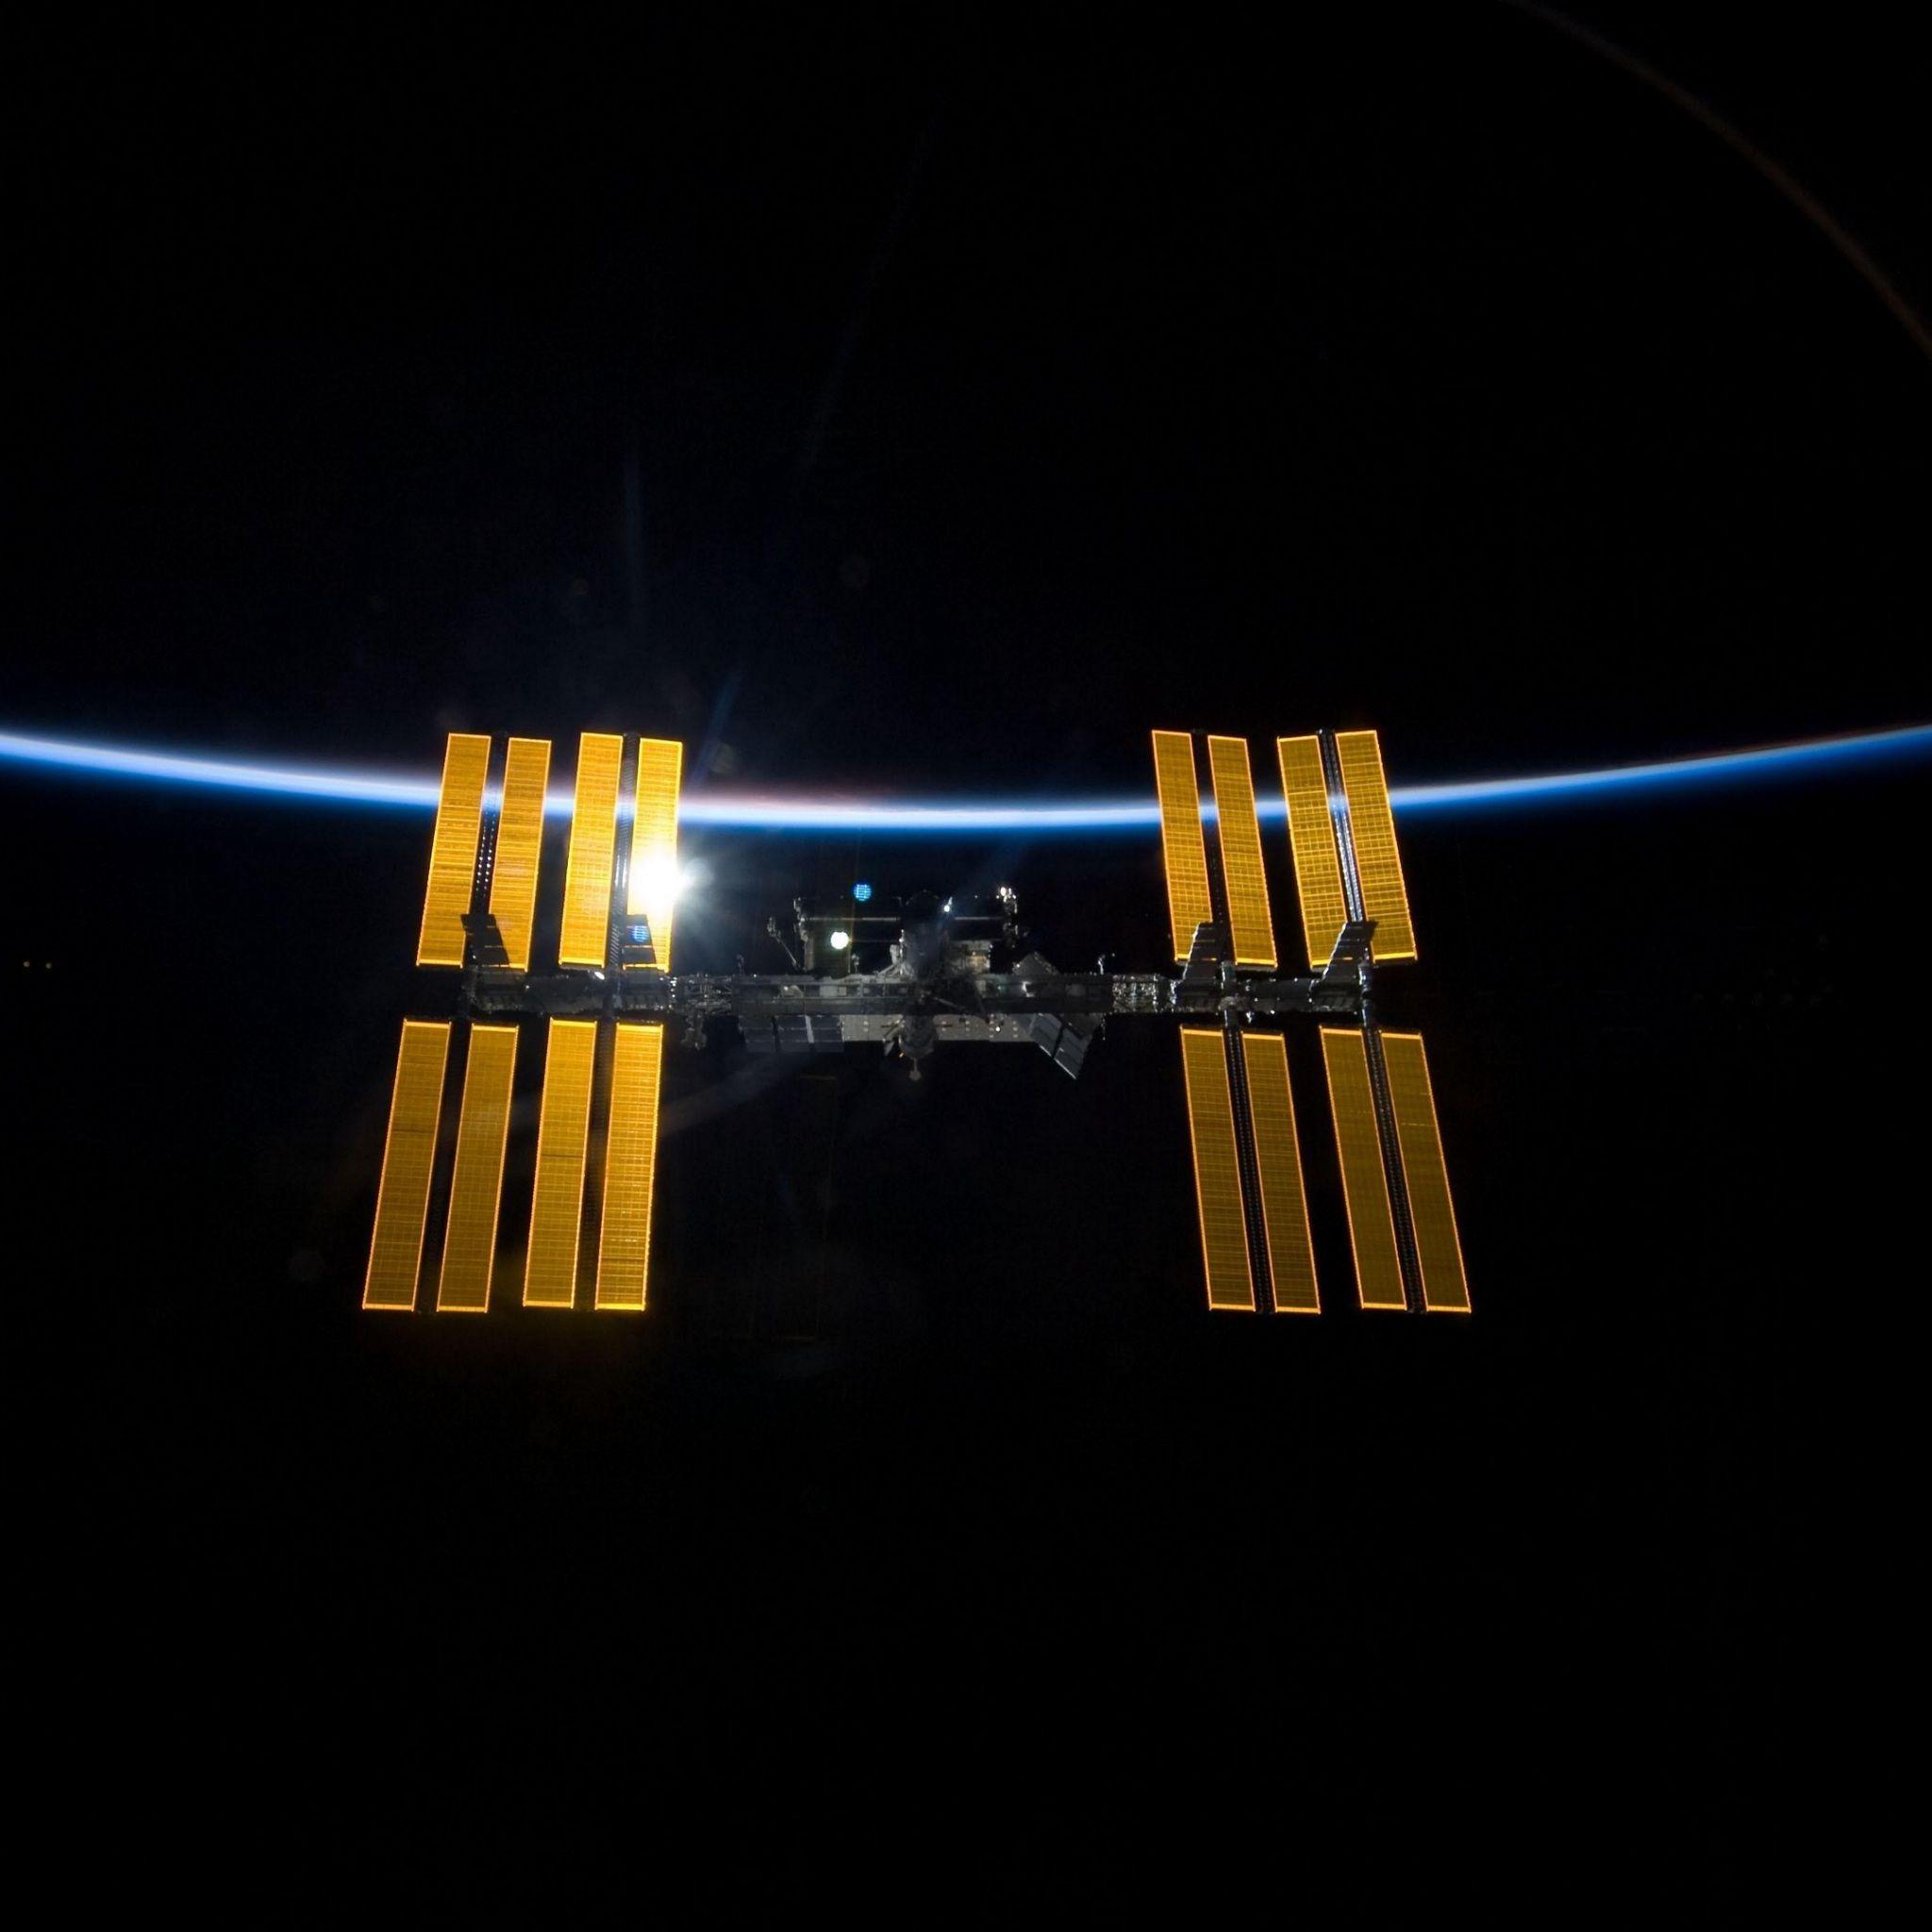 Space Station 4K Wallpapers - Top Free Space Station 4K Backgrounds